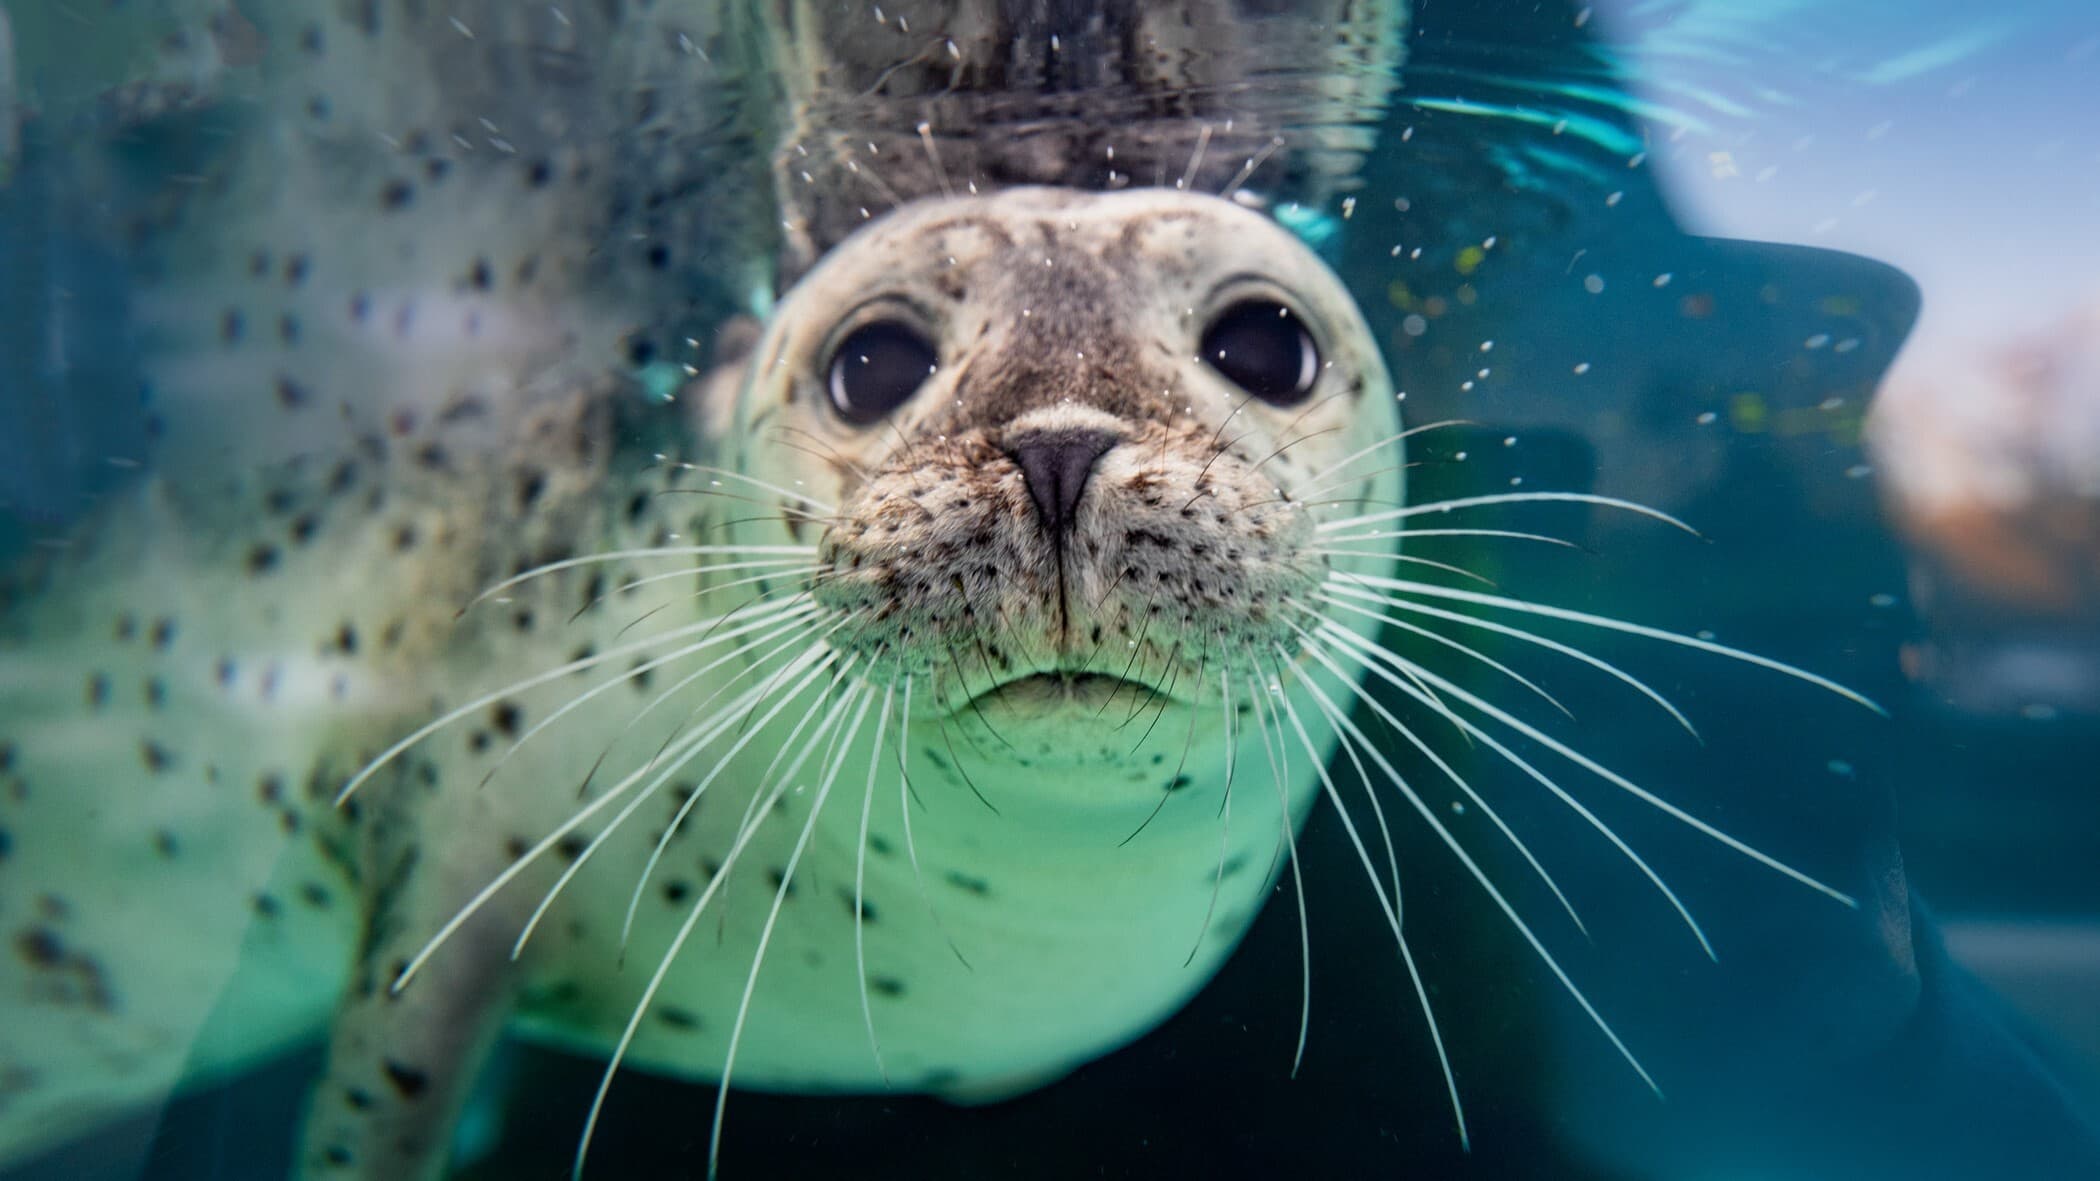 Monty the harbor seal looks at the camera from up close while swimming by underwater